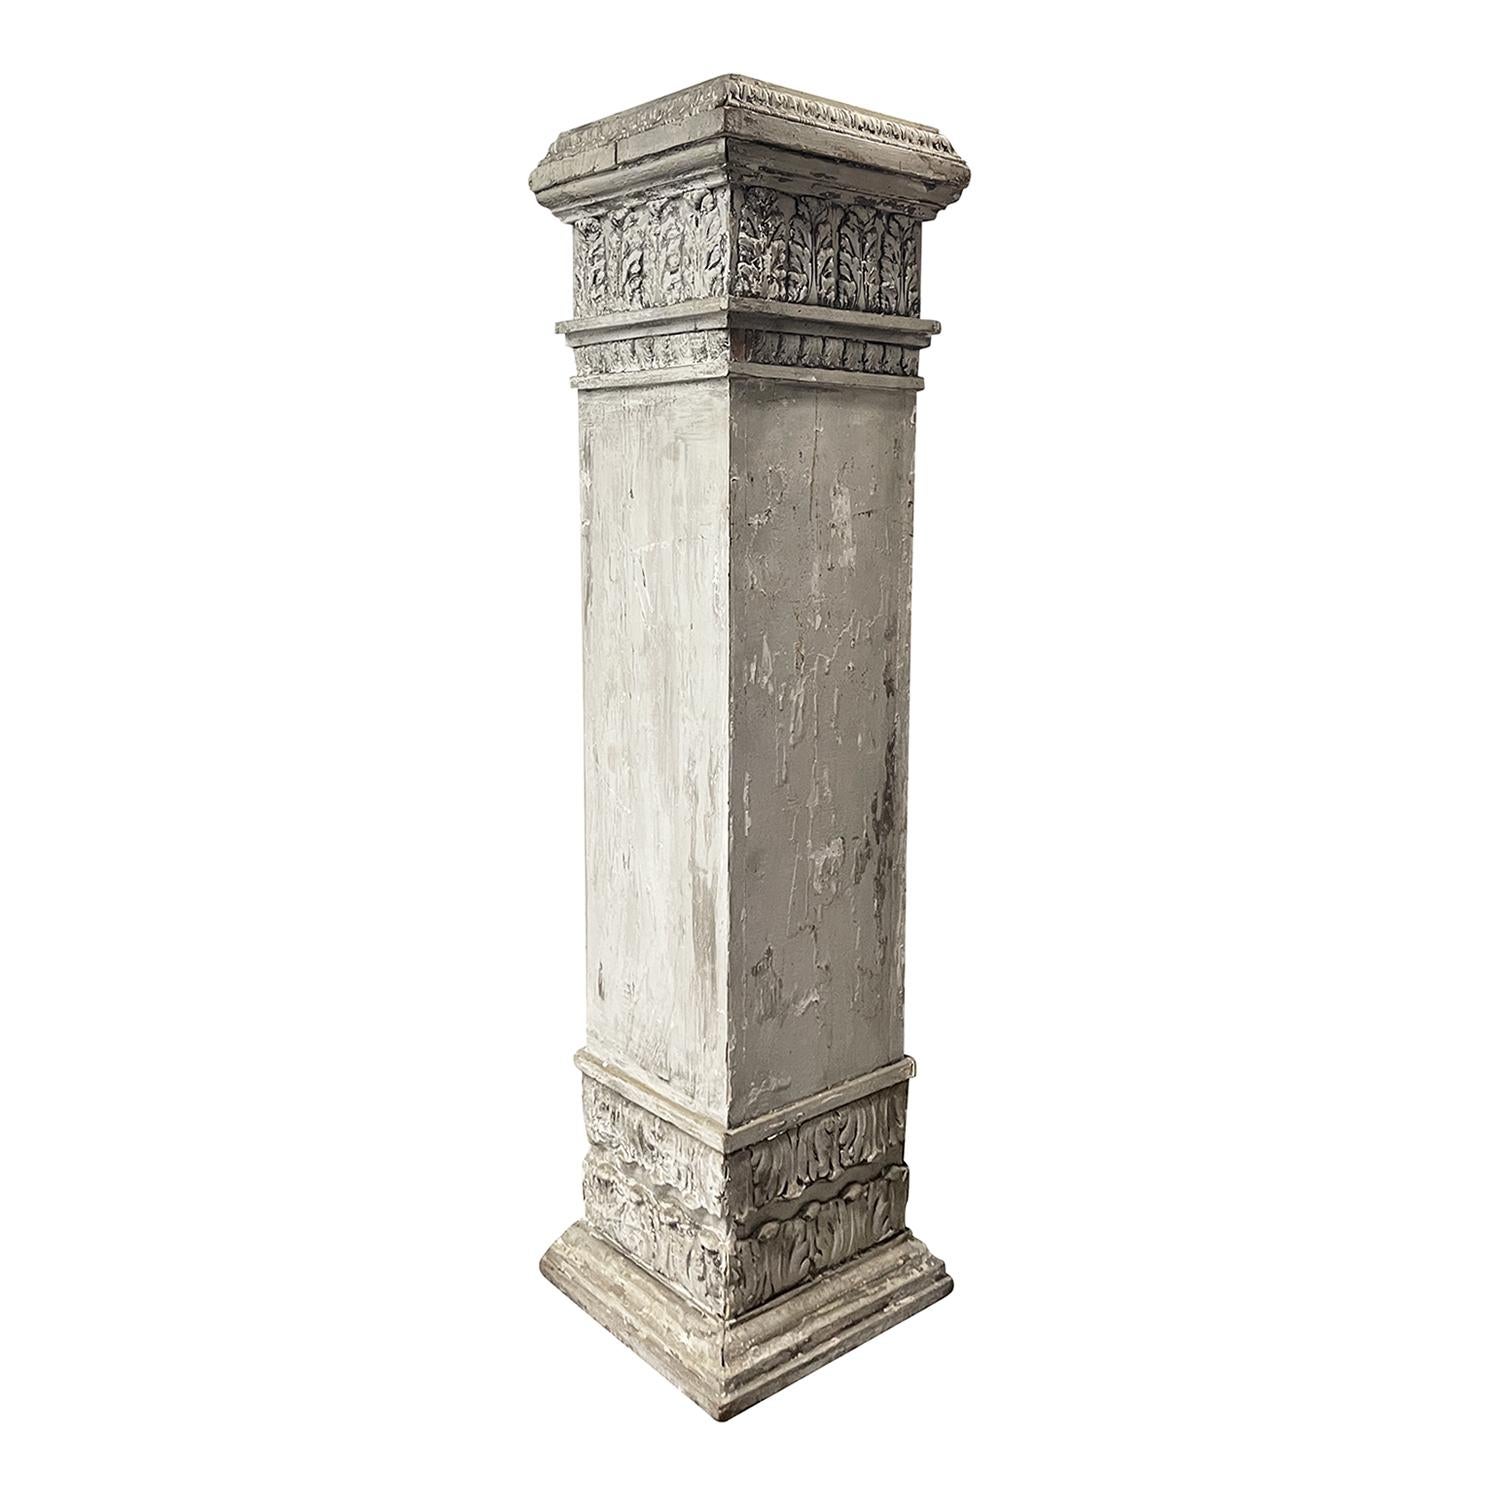 A single, antique Swedish Gustavian column made of hand crafted painted Pinewood in good condition. The Scandinavian pedestal, podium is enhanced by detailed wood carvings. Minor losses, scratches due to age. Wear consistent with age and use. Circa